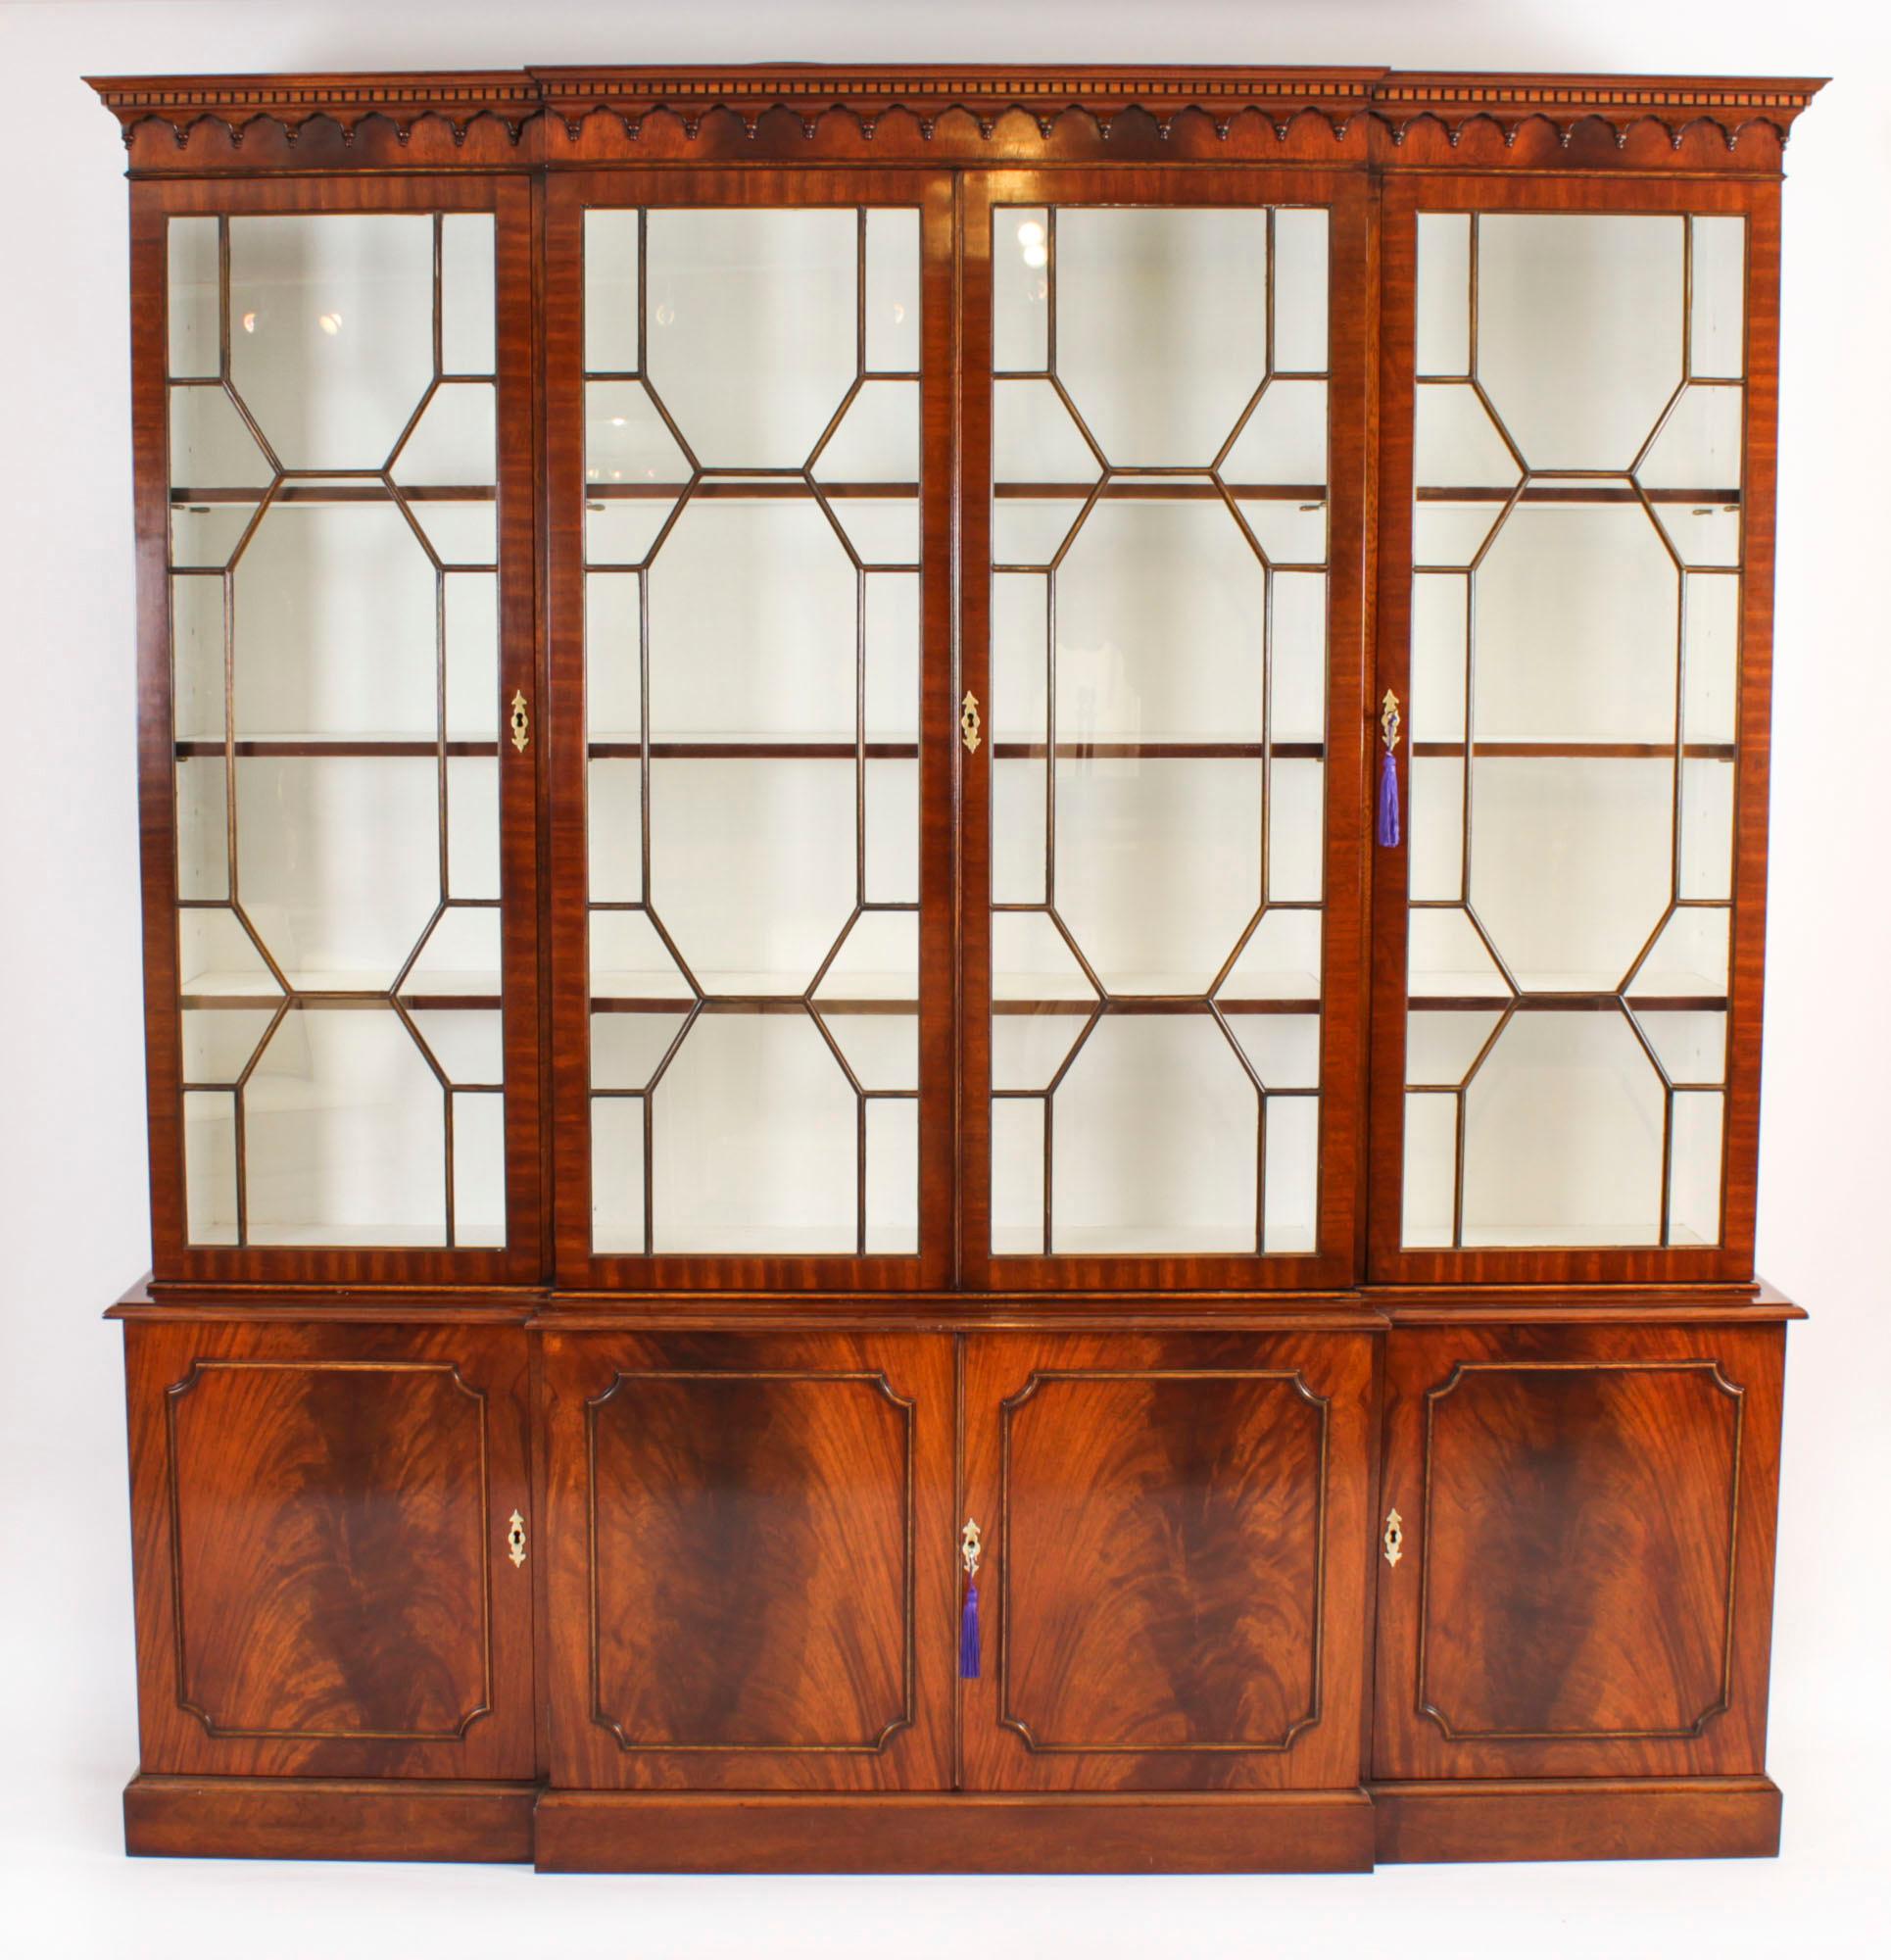 A delightful Vintage flame mahogany Georgian Revival library breakfront bookcase, dating from the mid 20th Century.

The top features a moulded cornice with a dental and arcaded frieze. The four astragal glazed doors open to reveal three adjustable